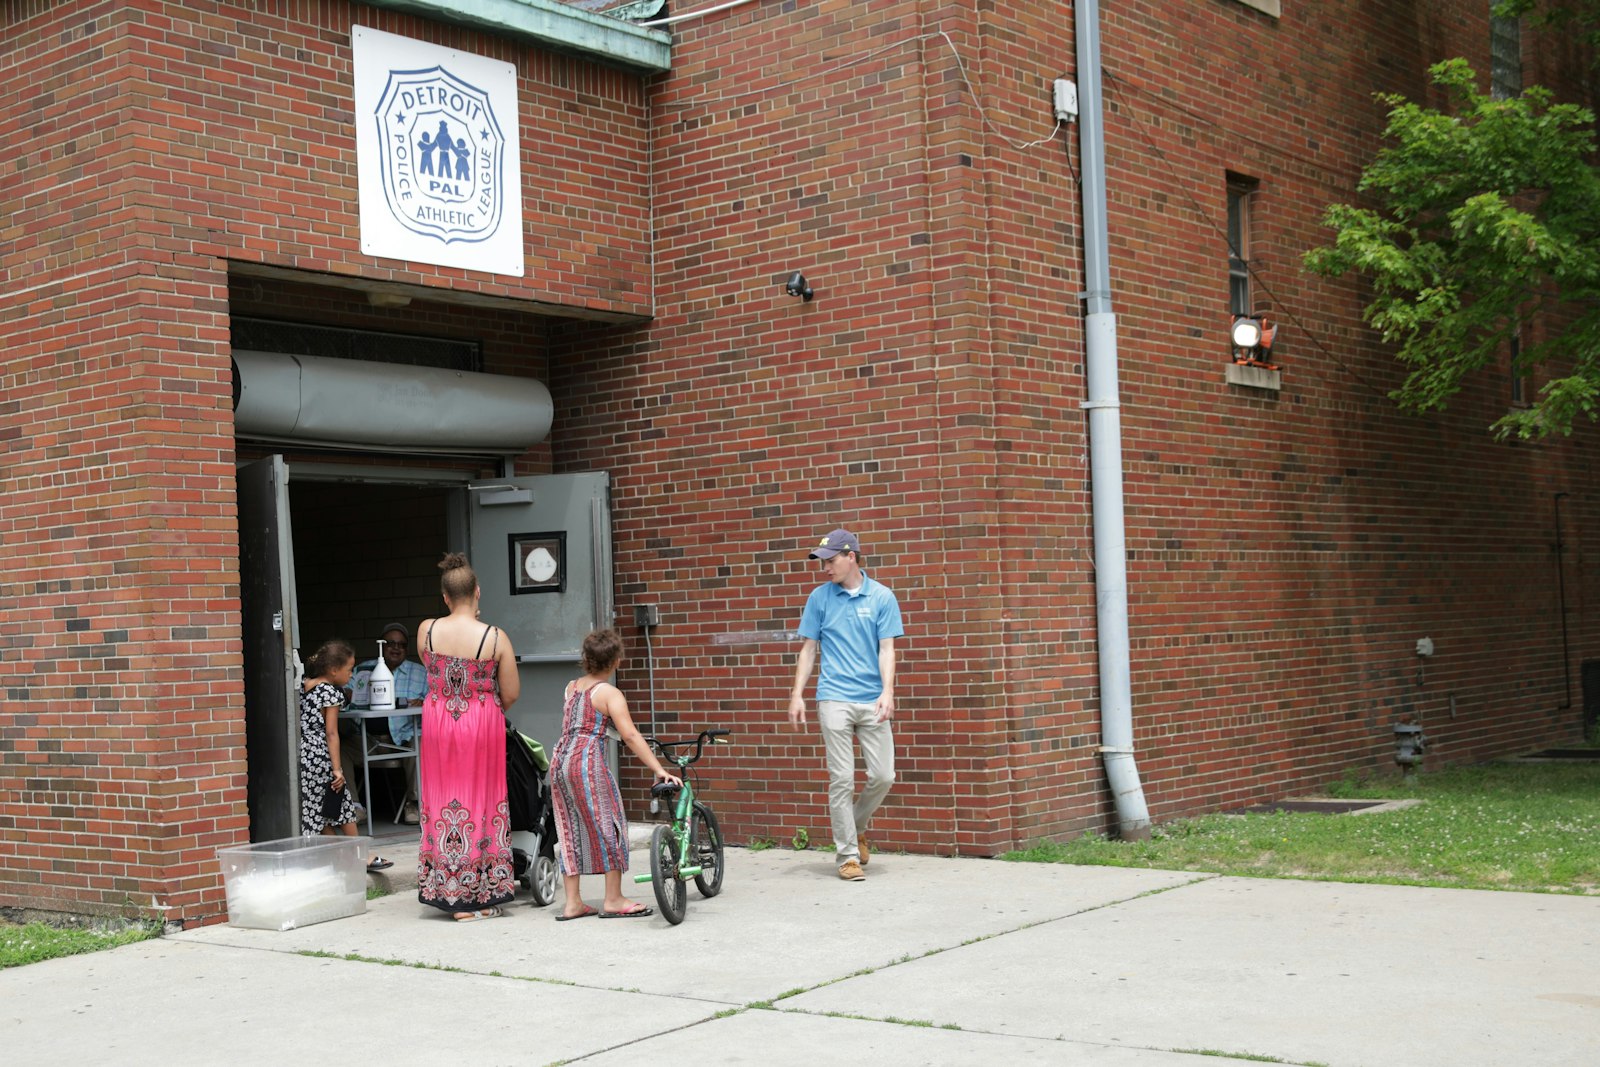 All Saints Soup Kitchen and Food Pantry opened its food pantry June 13 while the soup kitchen is awaiting City of Detroit Health Department approval. The location serves residents in the 48209 and 48210 ZIP codes who are already receiving state assistance.